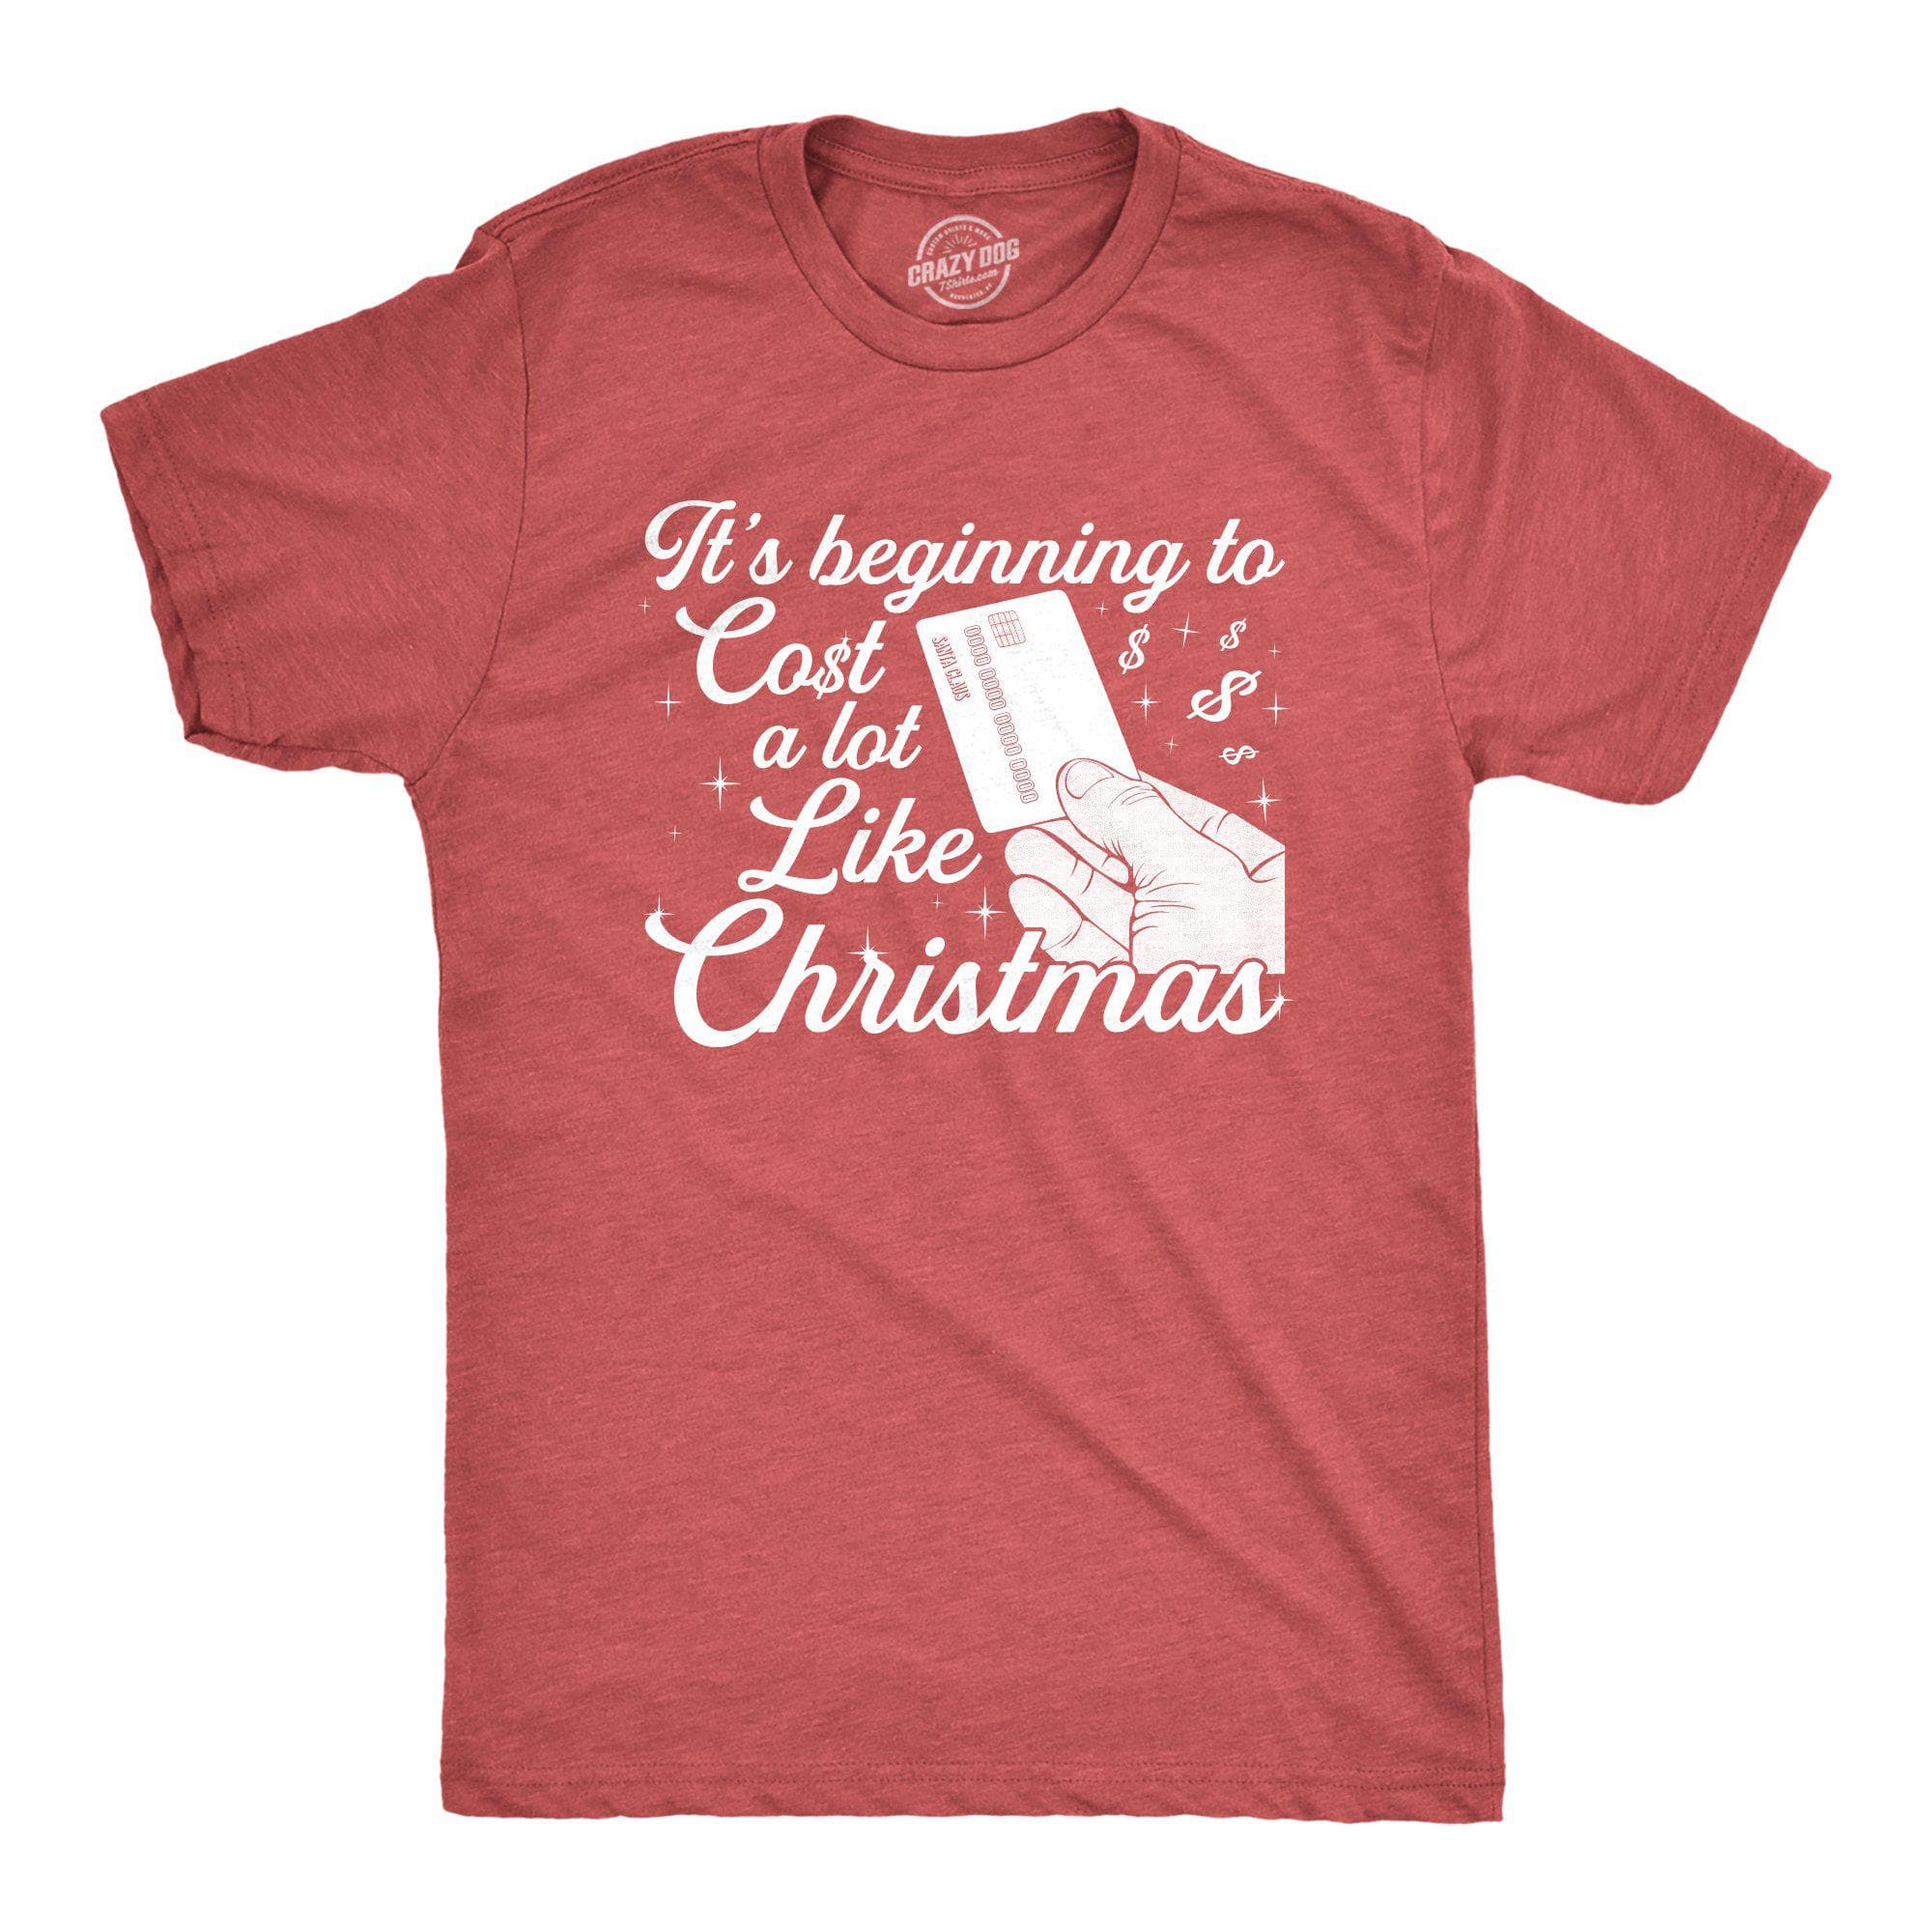 It's Beginning To Cost A Lot Like Christmas Men's Tshirt - Crazy Dog T-Shirts